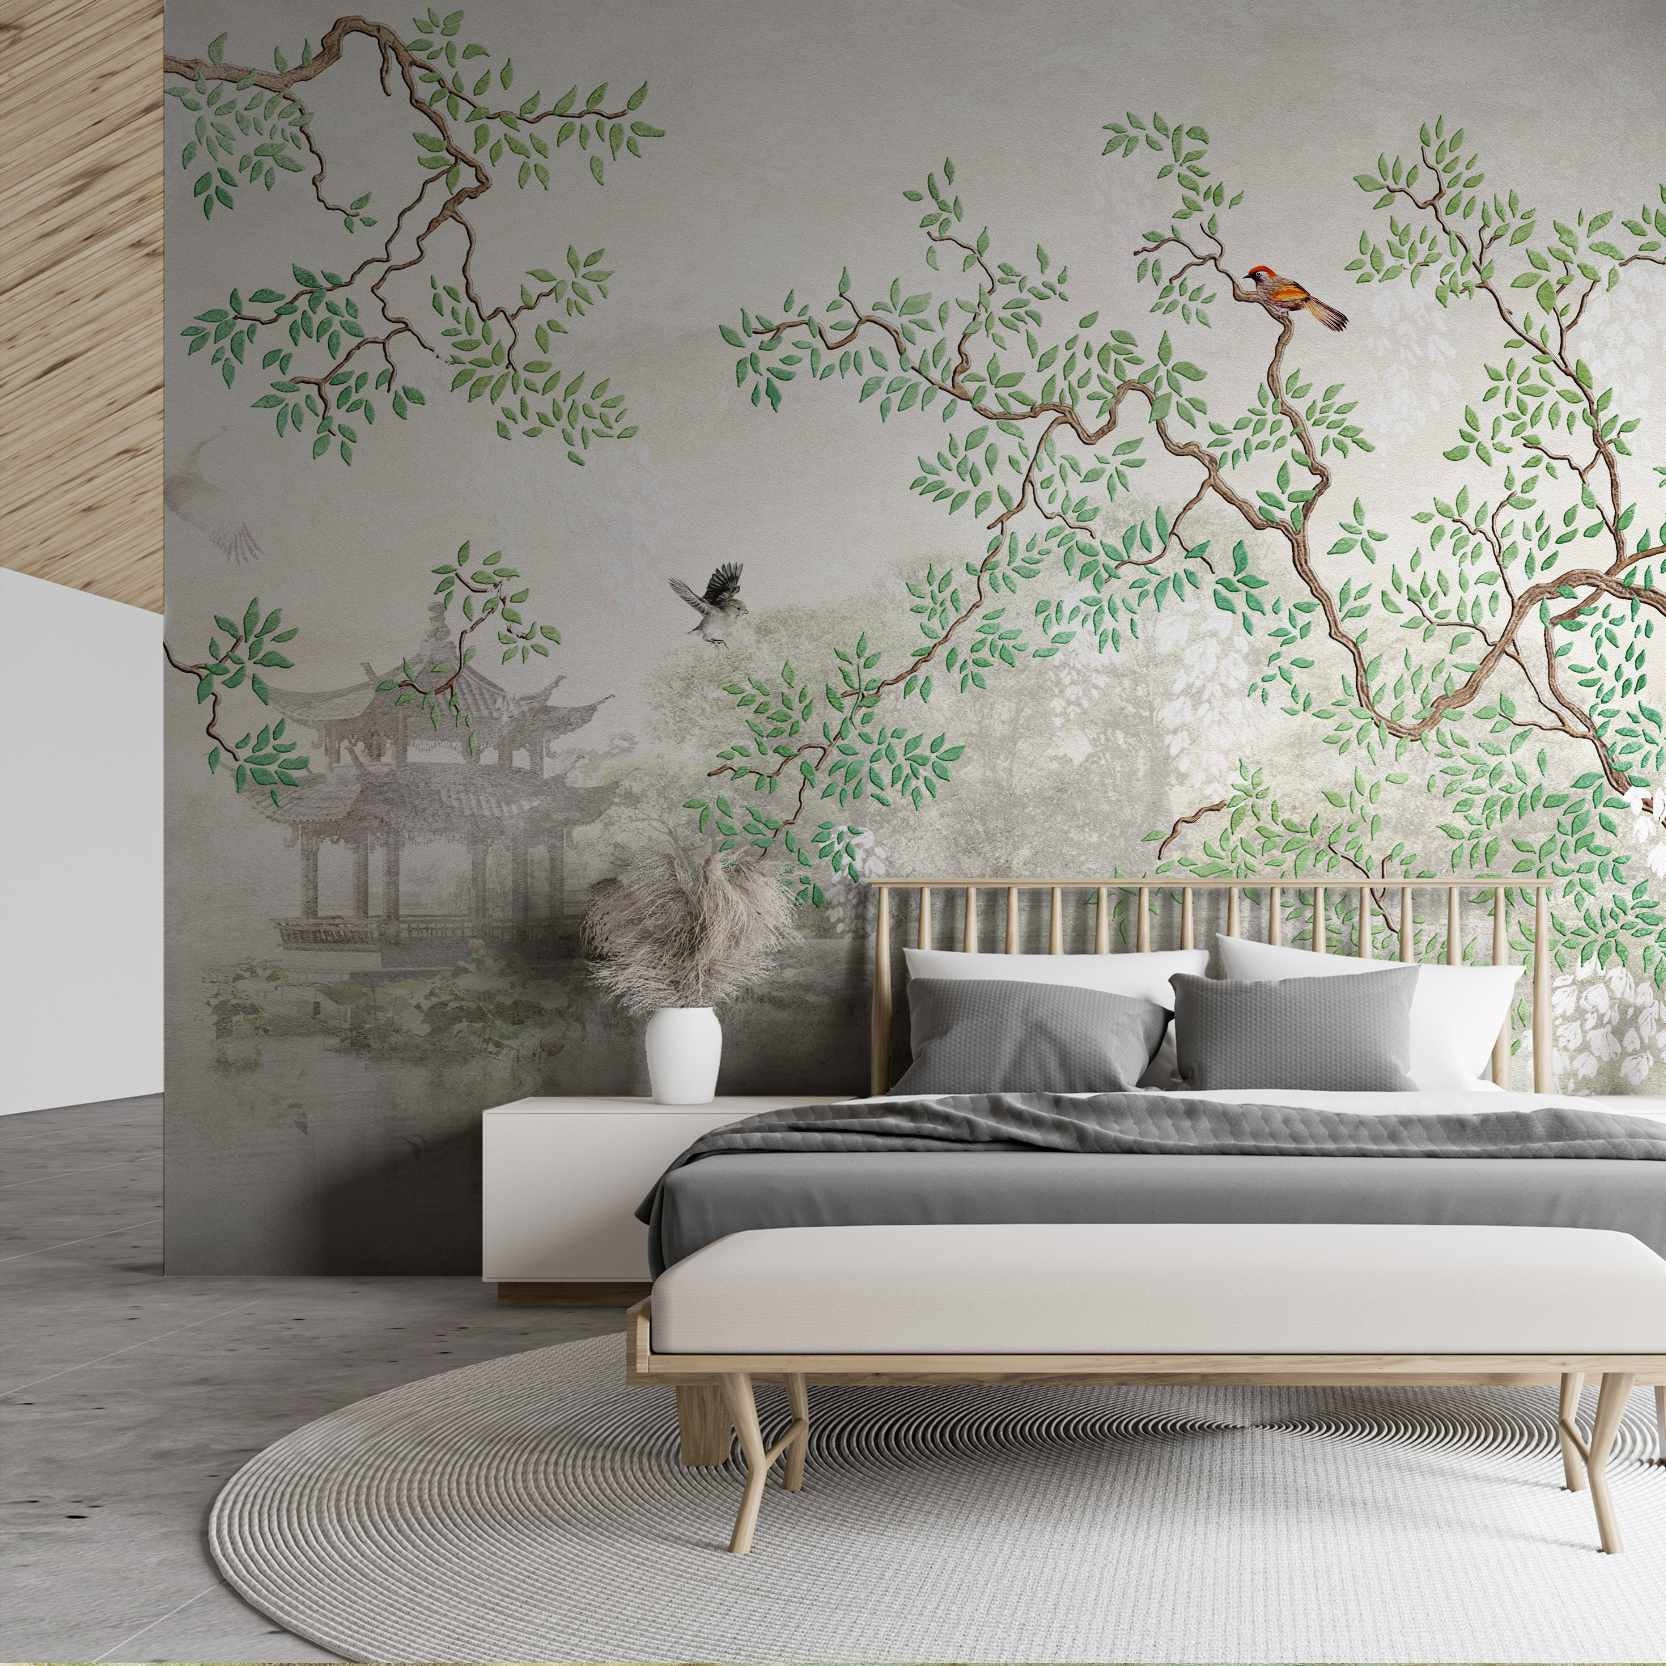 Trees and Birds on a Lake Derous Wallpaper Mural Removable